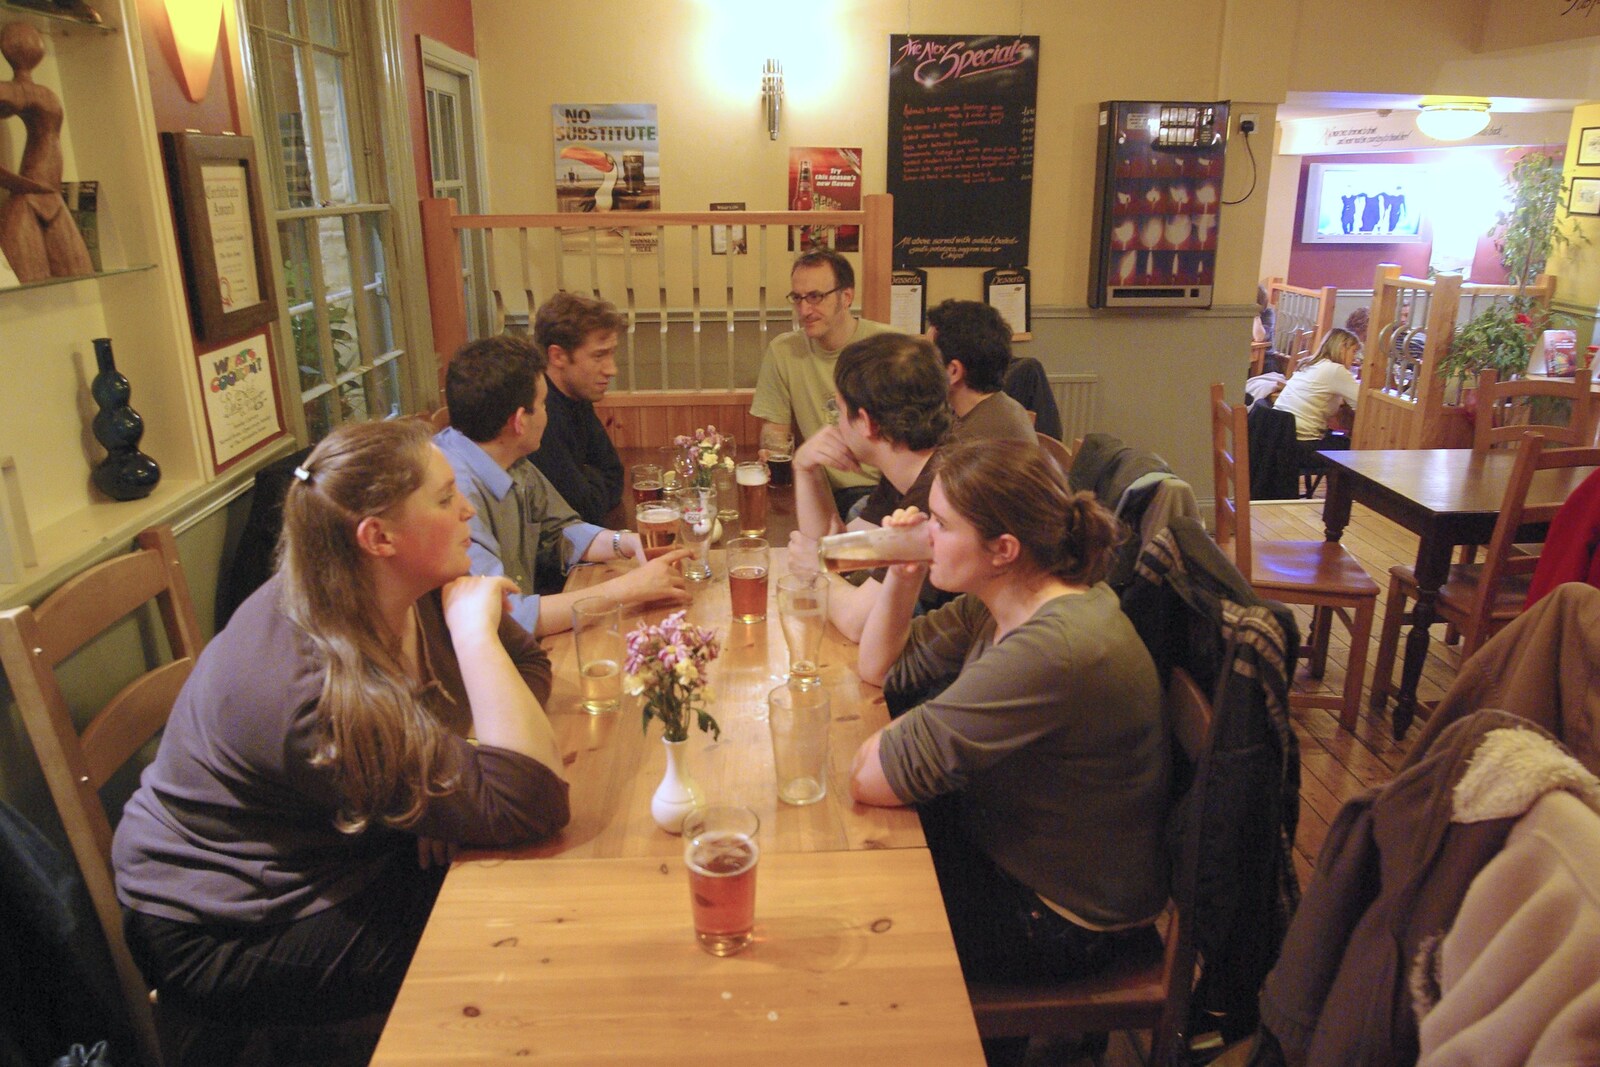 Lively discussion over beer from Hani Leaves The Lab, Alexandra Arms, Cambridge - 23rd February 2007